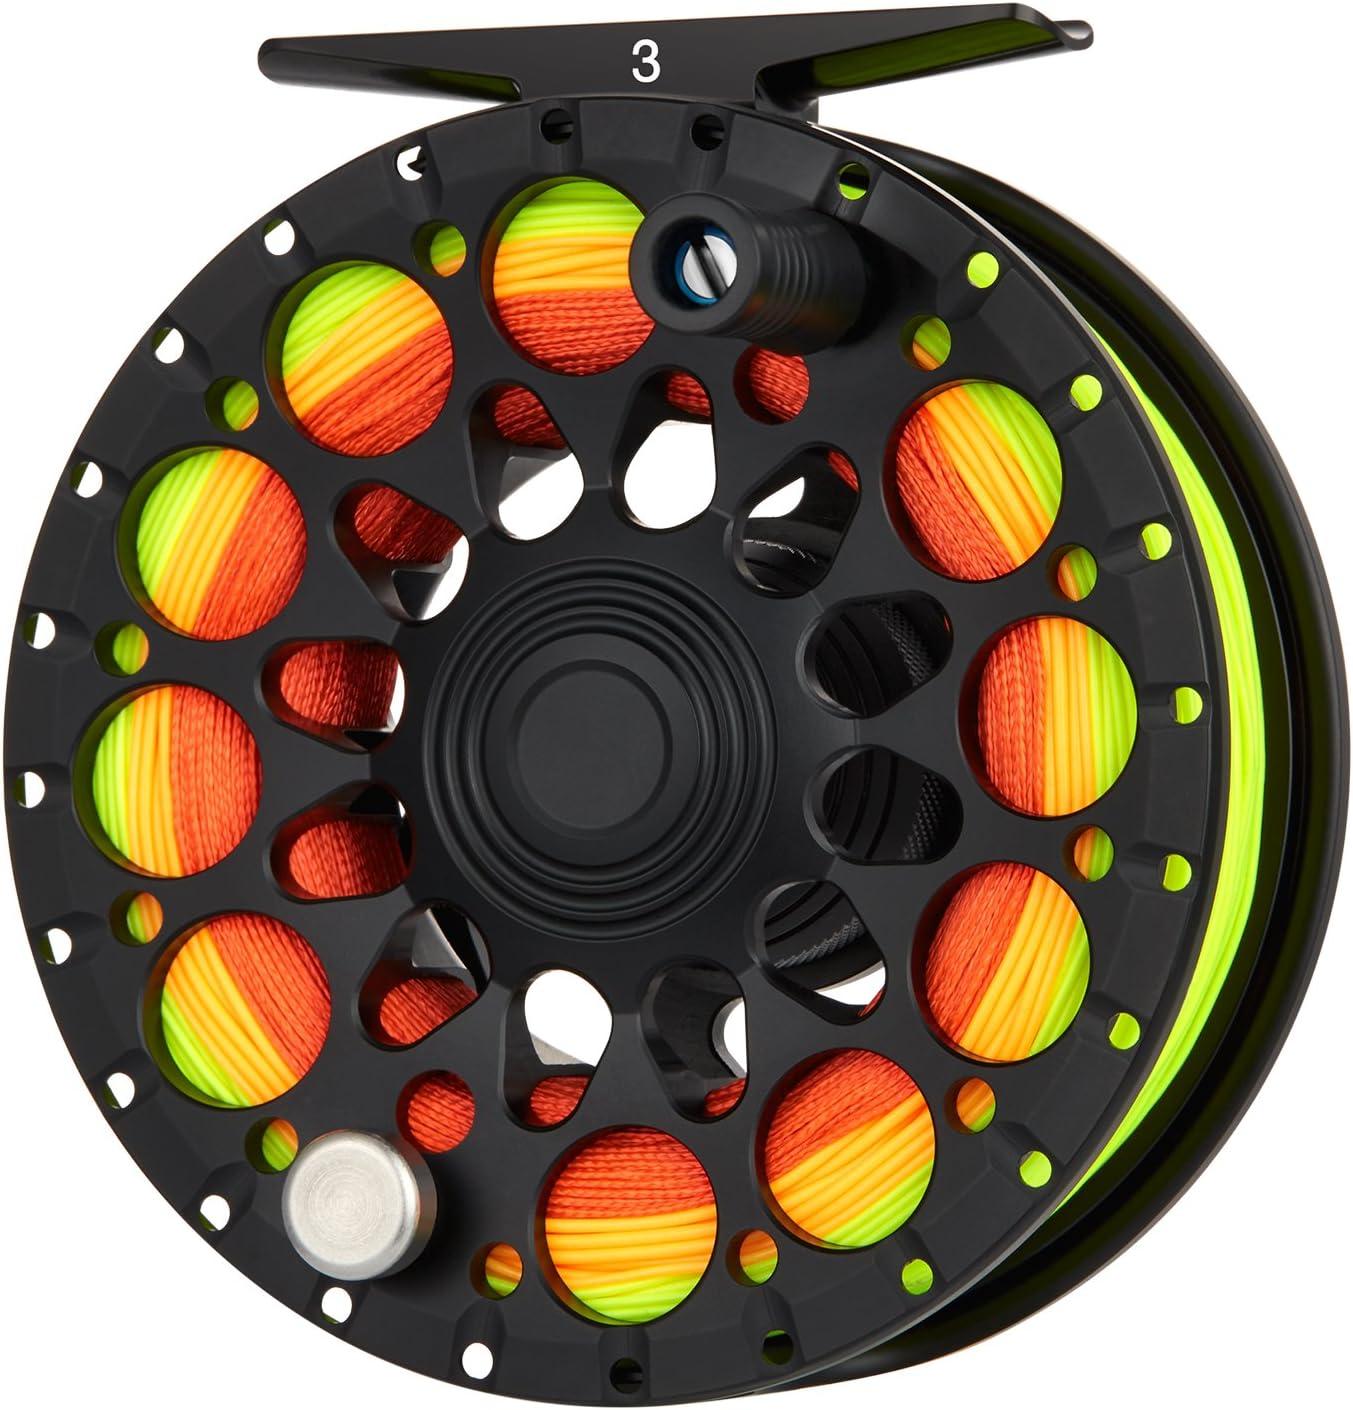 Piscifun Crest Fly Fishing Reel Large Arbor Fully Sealed Drag Saltwater CNC-machined  Aluminum Alloy Fly Reel 5/6, 7/8, 9/10 (Green,Black) Black Crest-3(7/8wt)